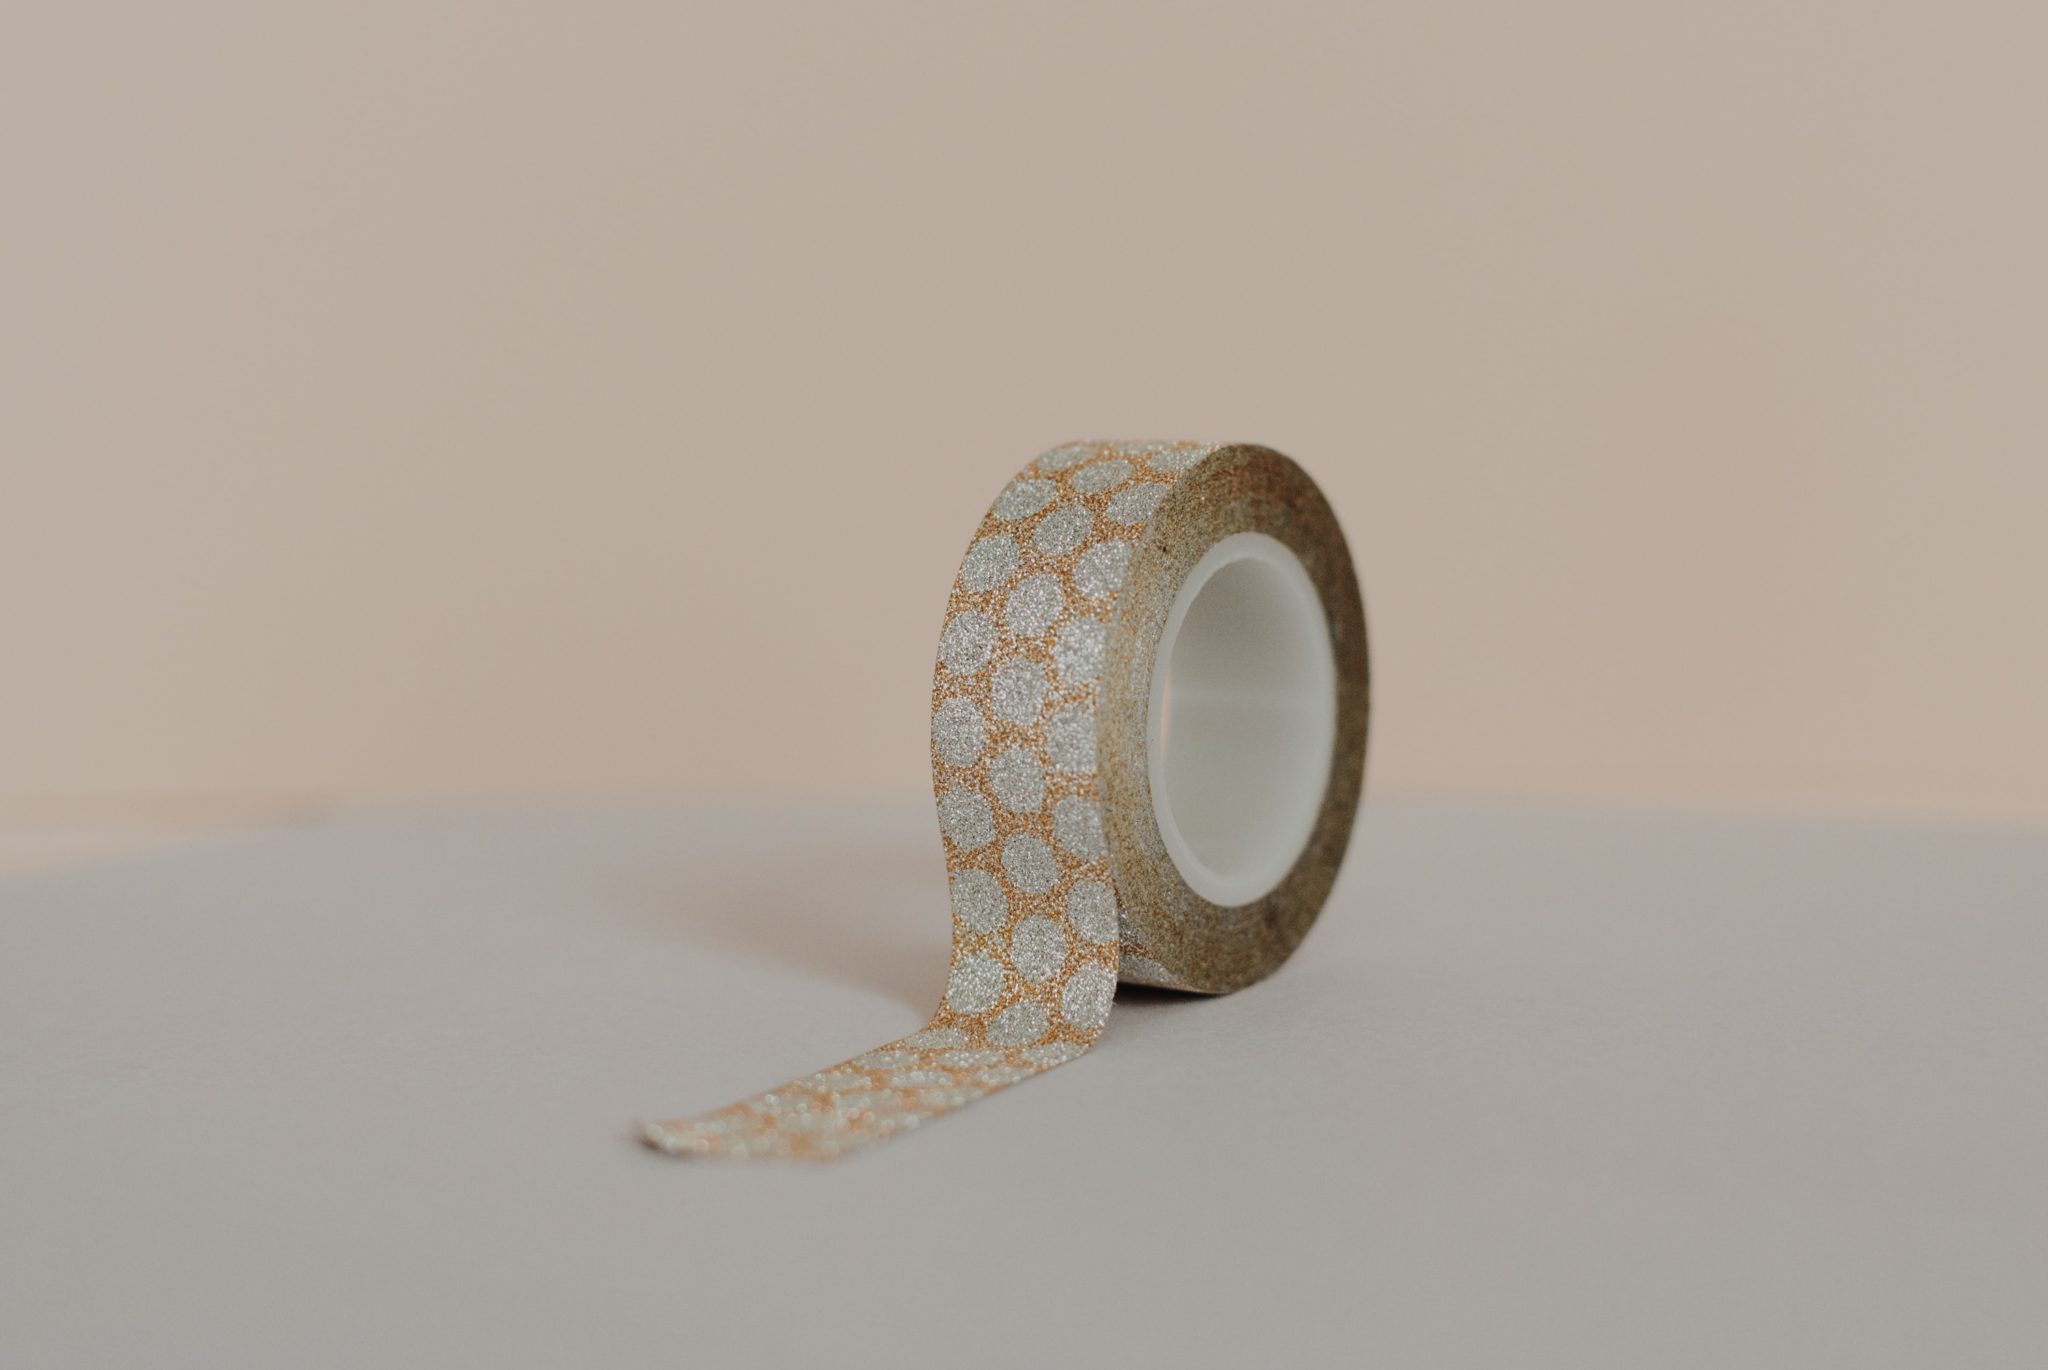 A roll of orange floral tape